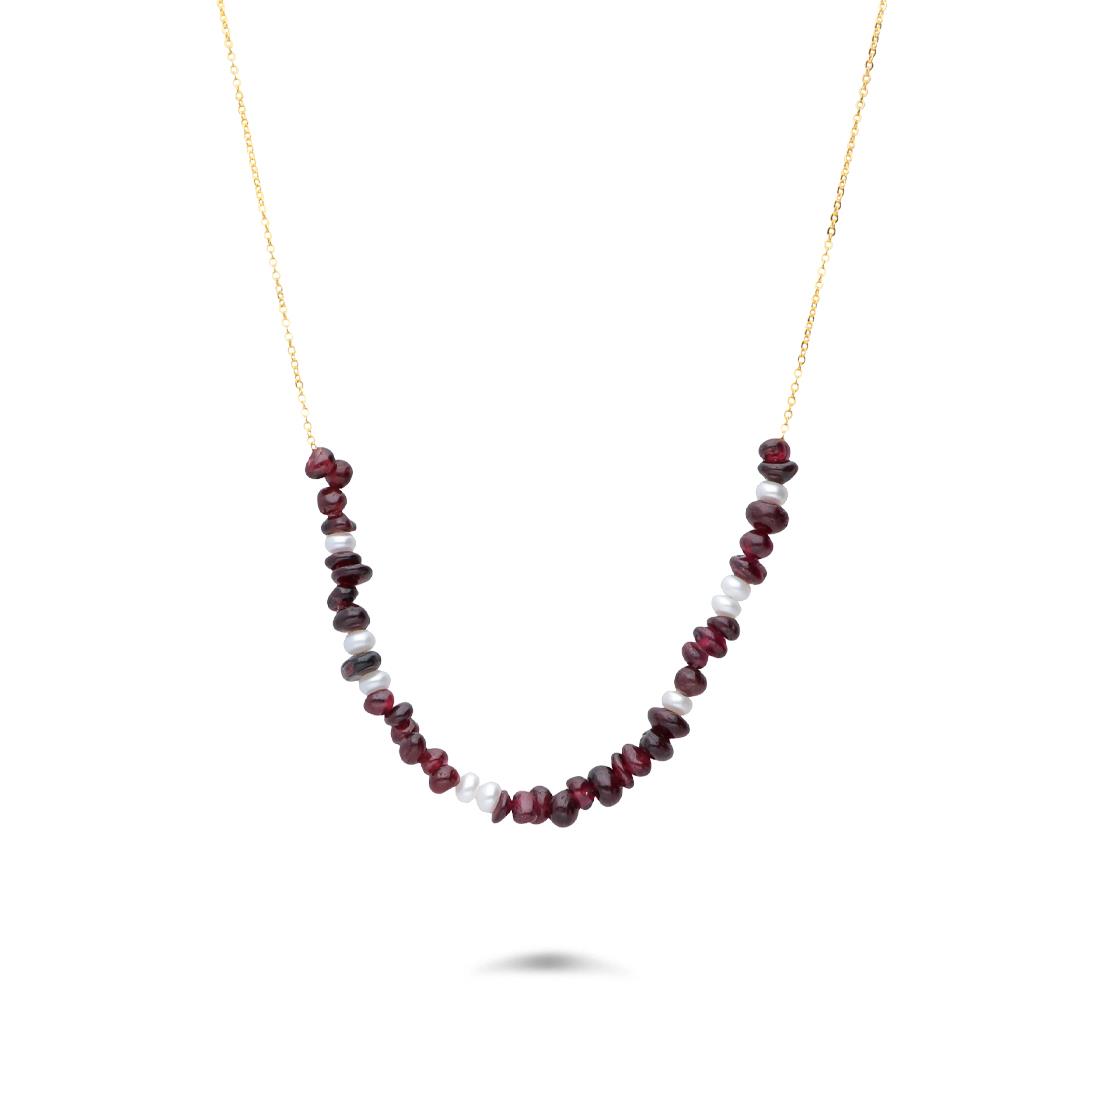 Silver necklace with pearls and garnet - MAYUMI